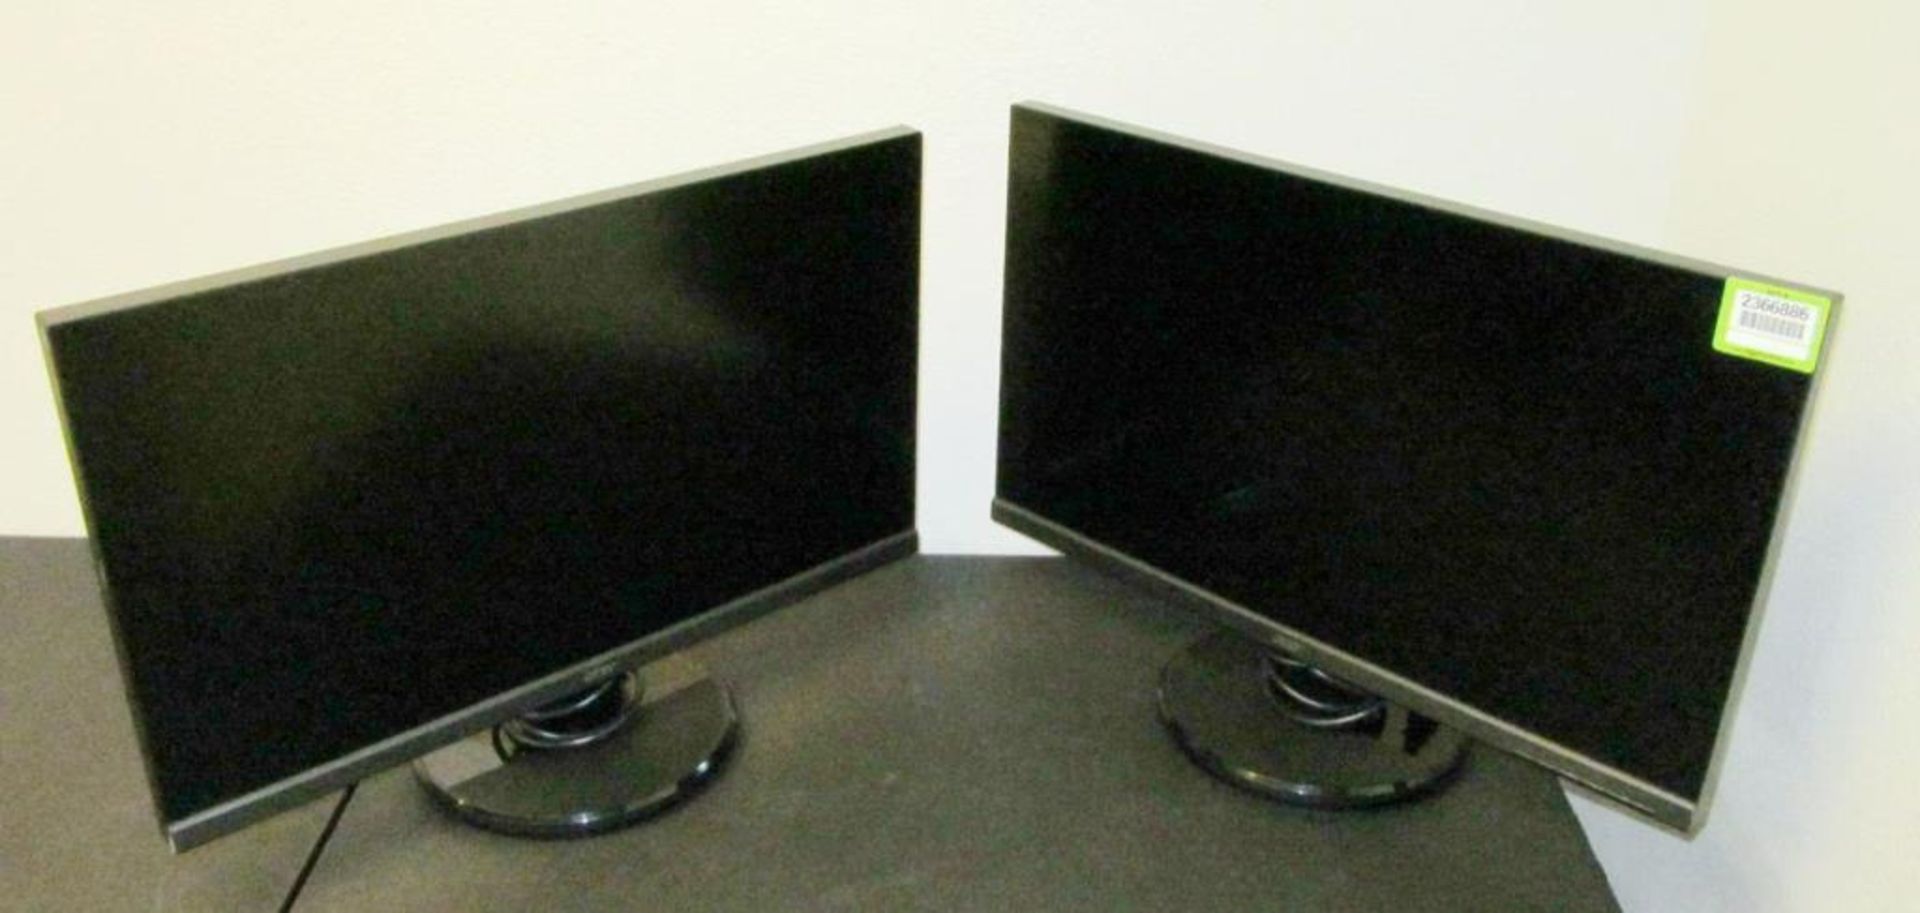 Acer 27" LCD Monitors